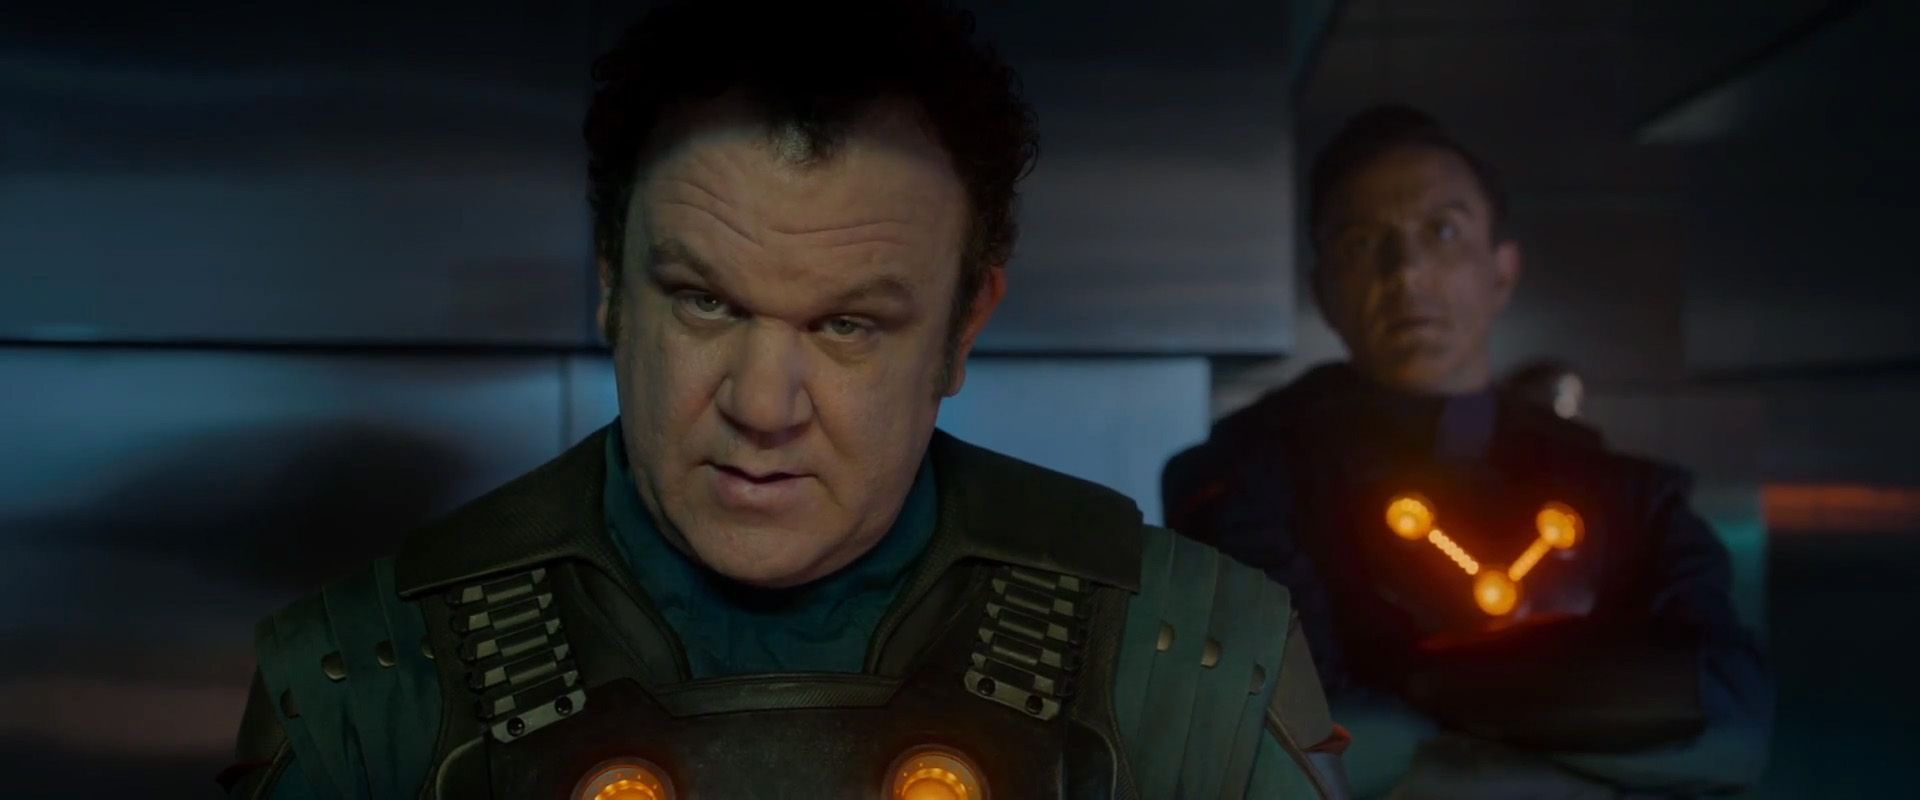 Guardians of the Galaxy Trailer - John C Reilly and Peter Serafinowicz